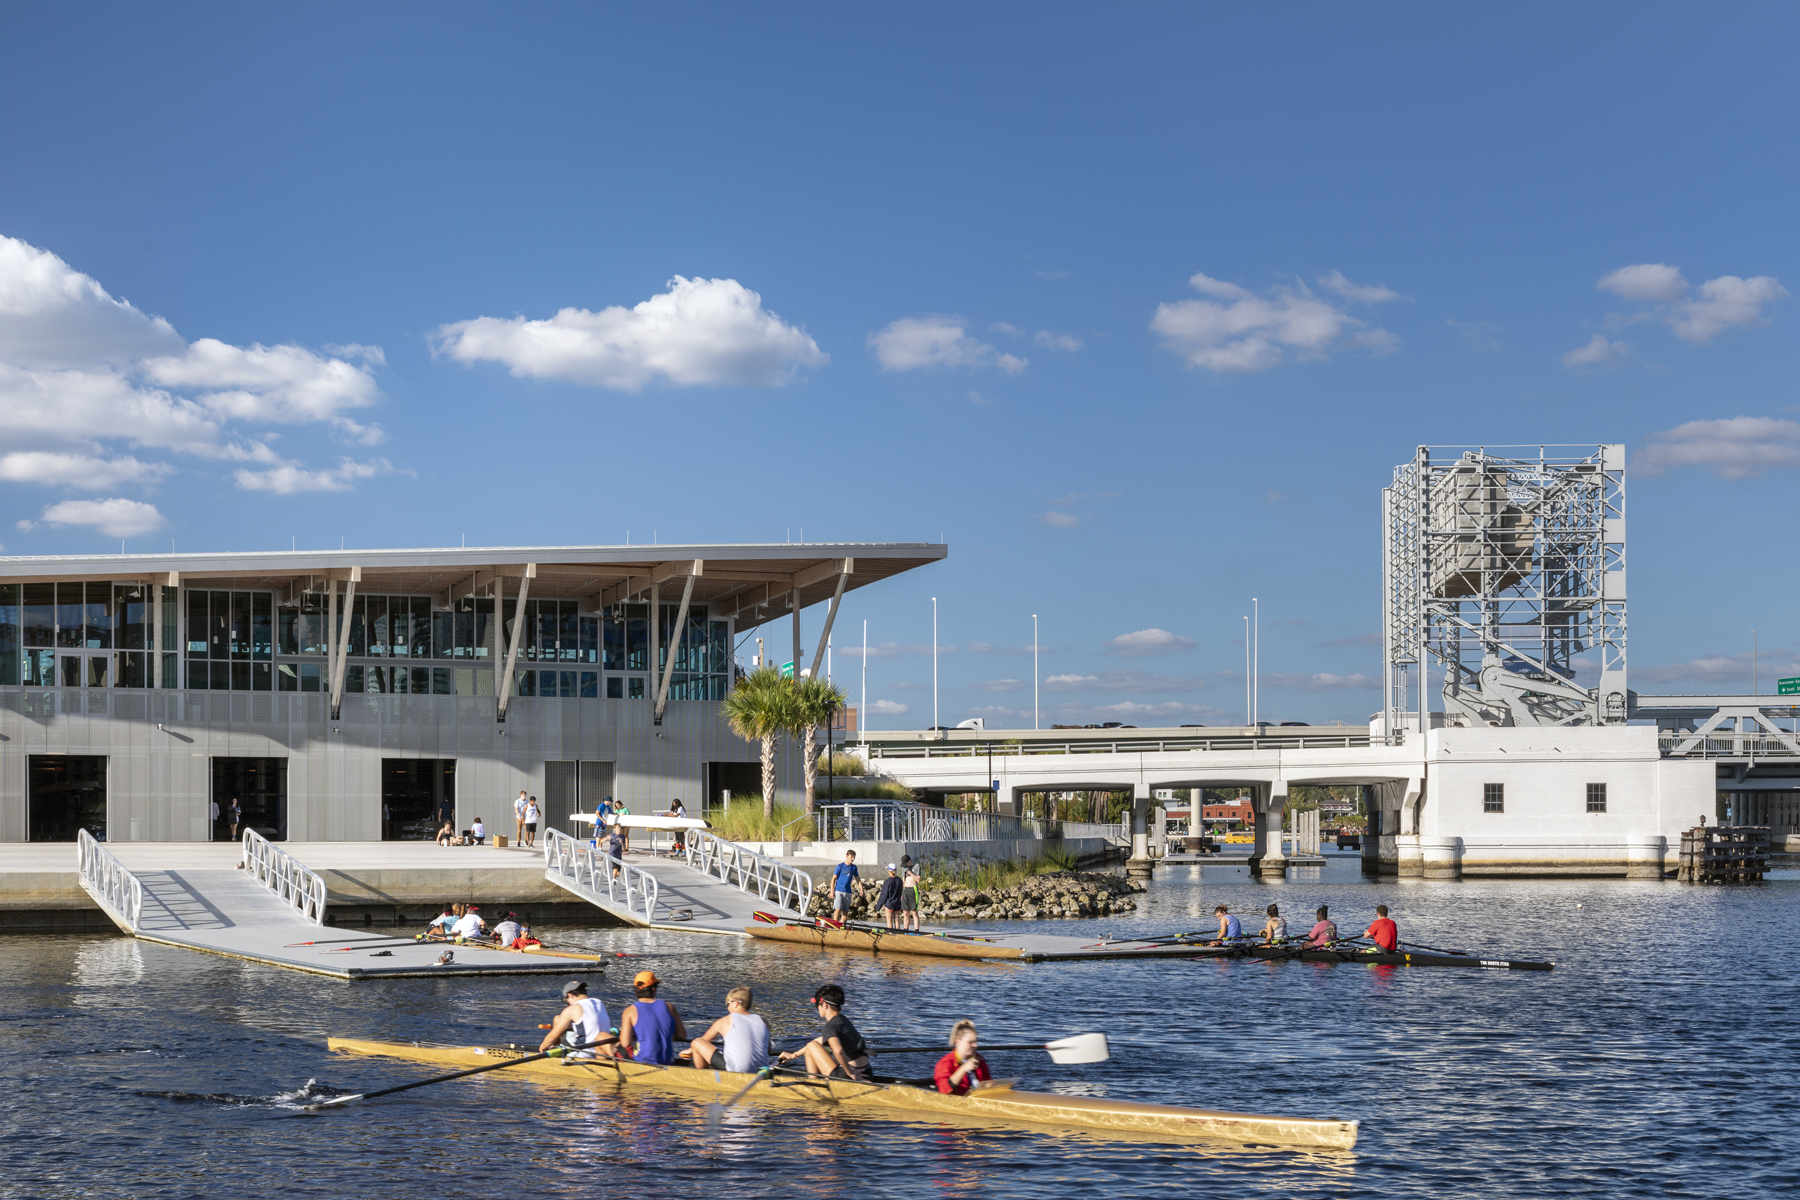 Award-winning Denver-based urban design firm Civitas actually reengineered part of Tampa’s Hillsborough River to create a calm water area for paddling instruction.